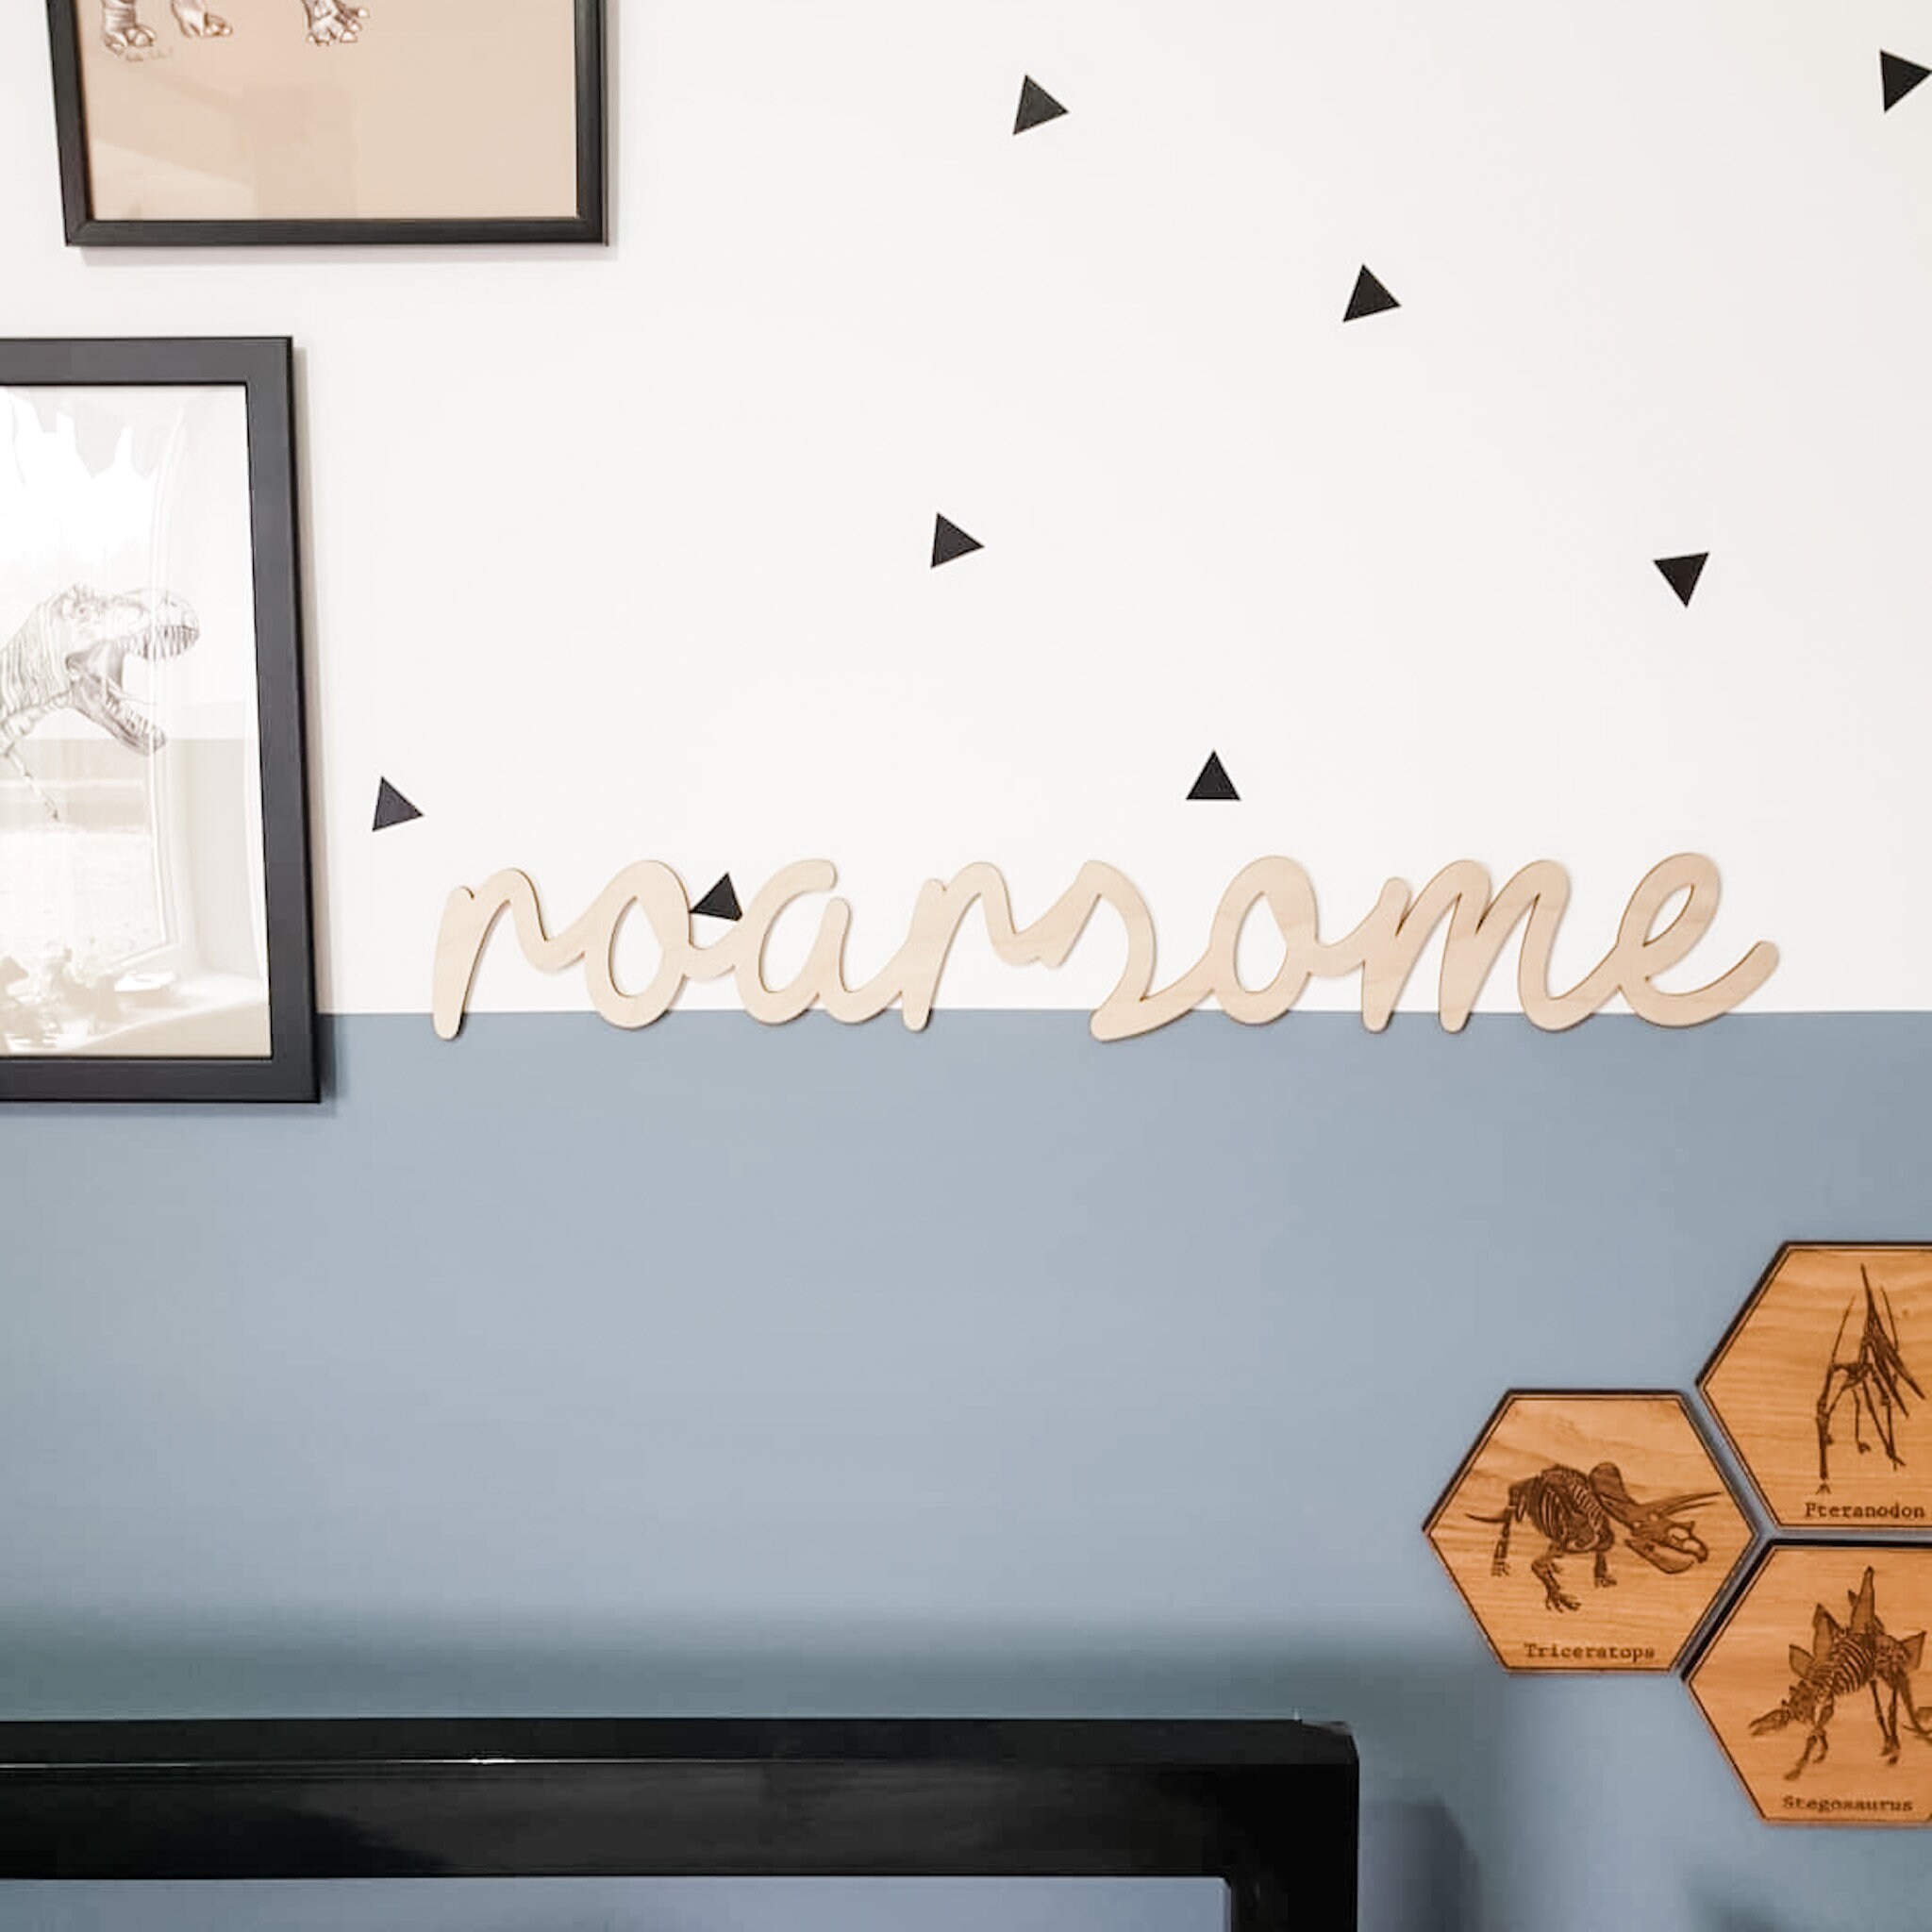 King of the JUNGLE Wall Lettering Nursery/playroom Decor 